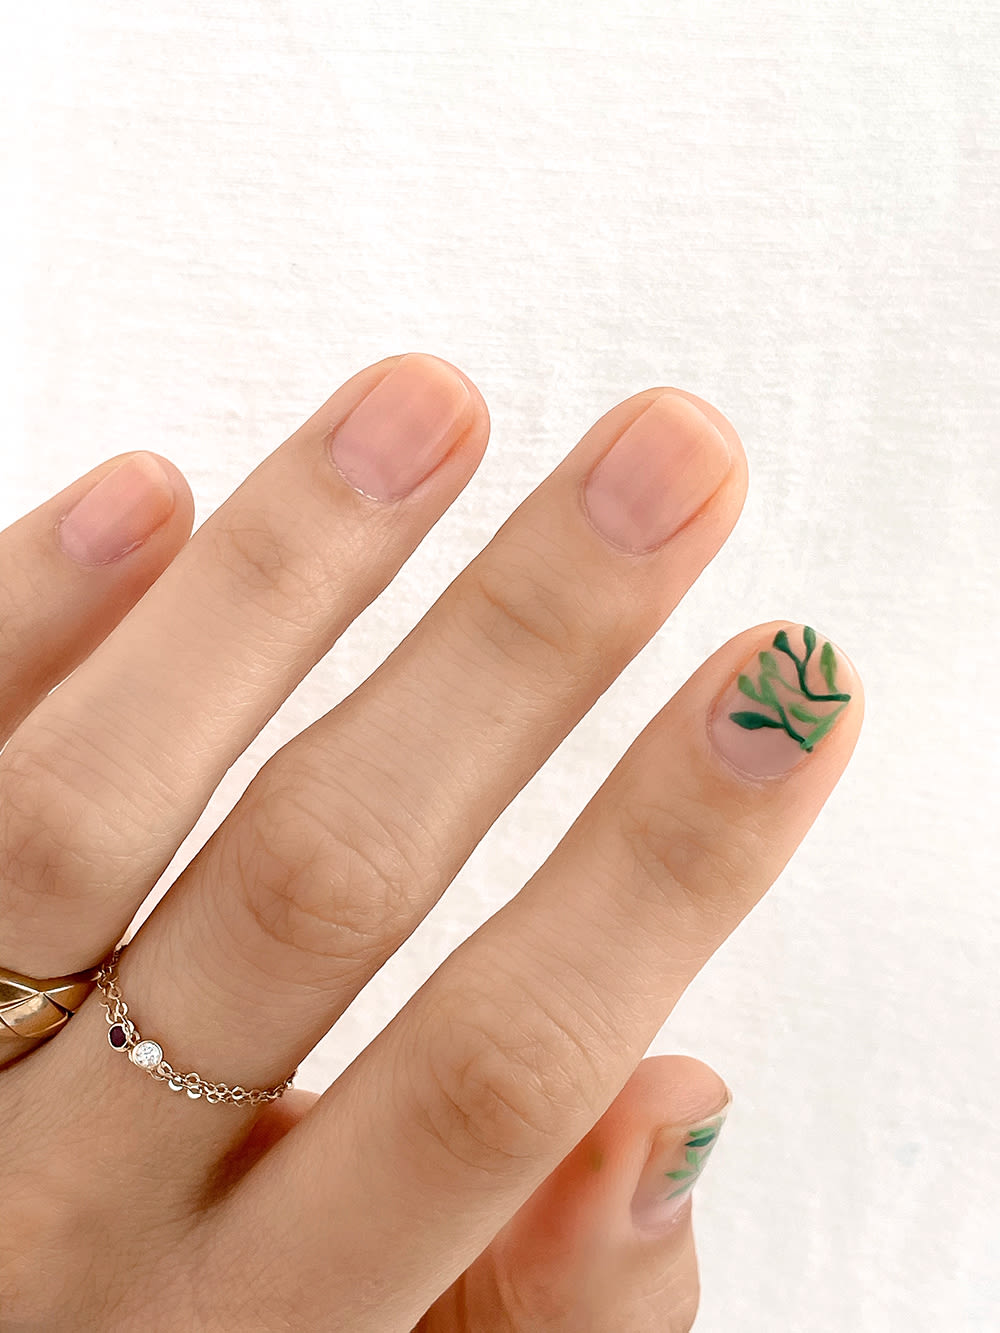 leaves drawn from stems for daisy nail tutorial